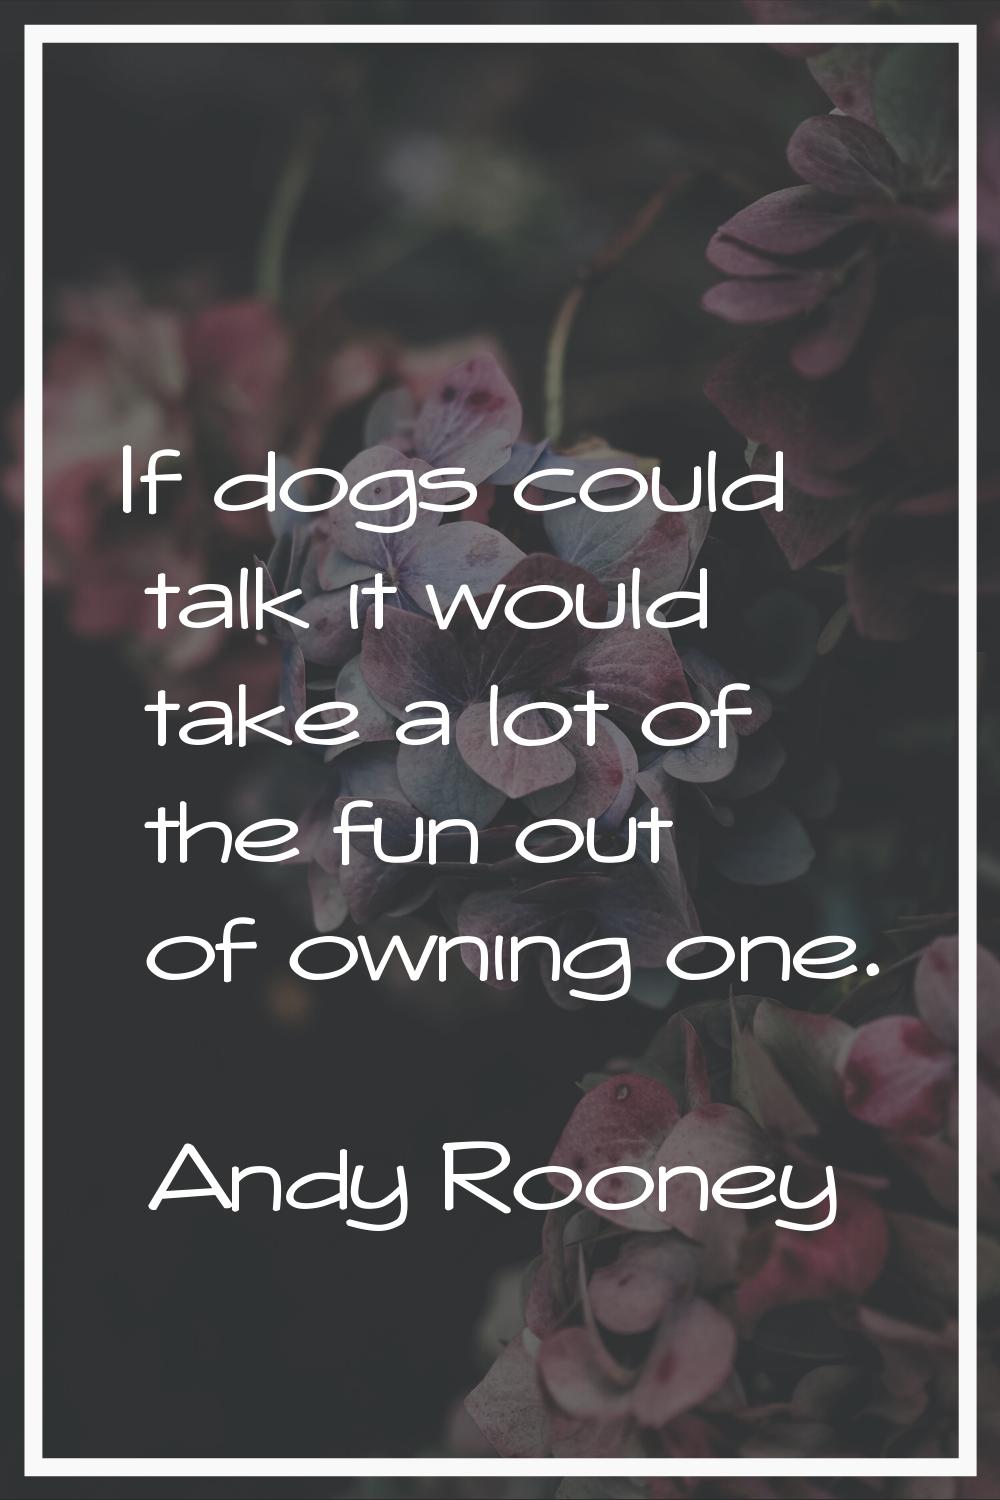 If dogs could talk it would take a lot of the fun out of owning one.